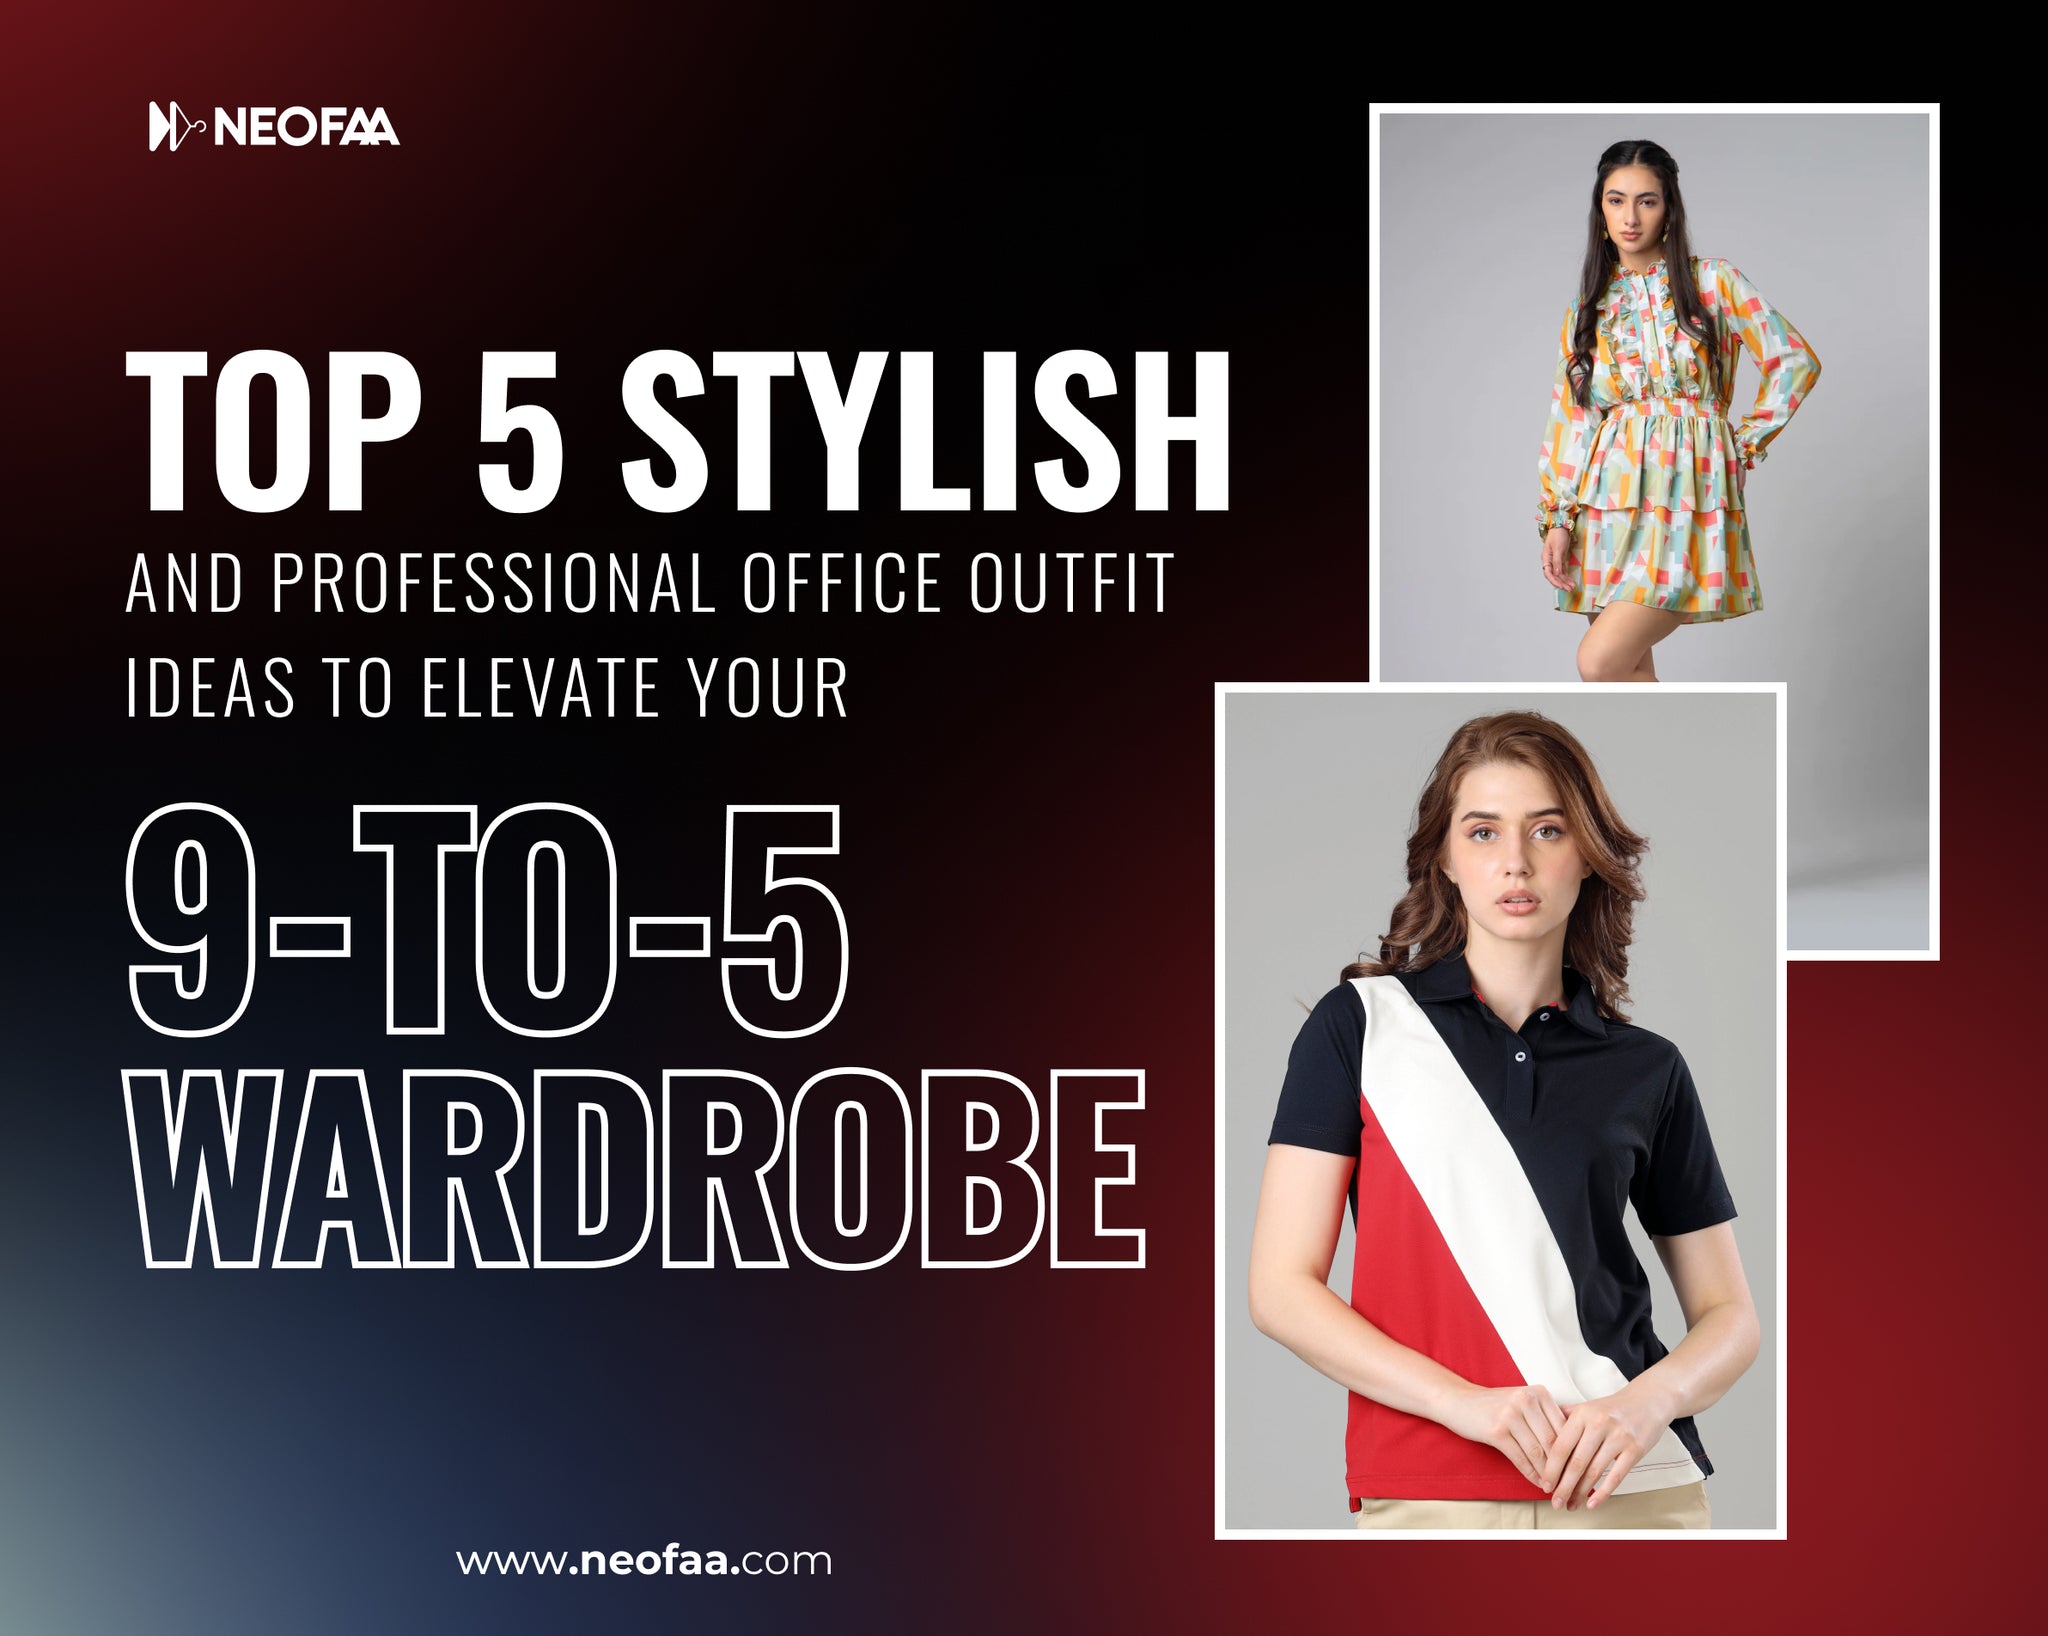 Top 5 Stylish and Professional Office Outfit Ideas to Elevate Your 9-to-5 Wardrobe